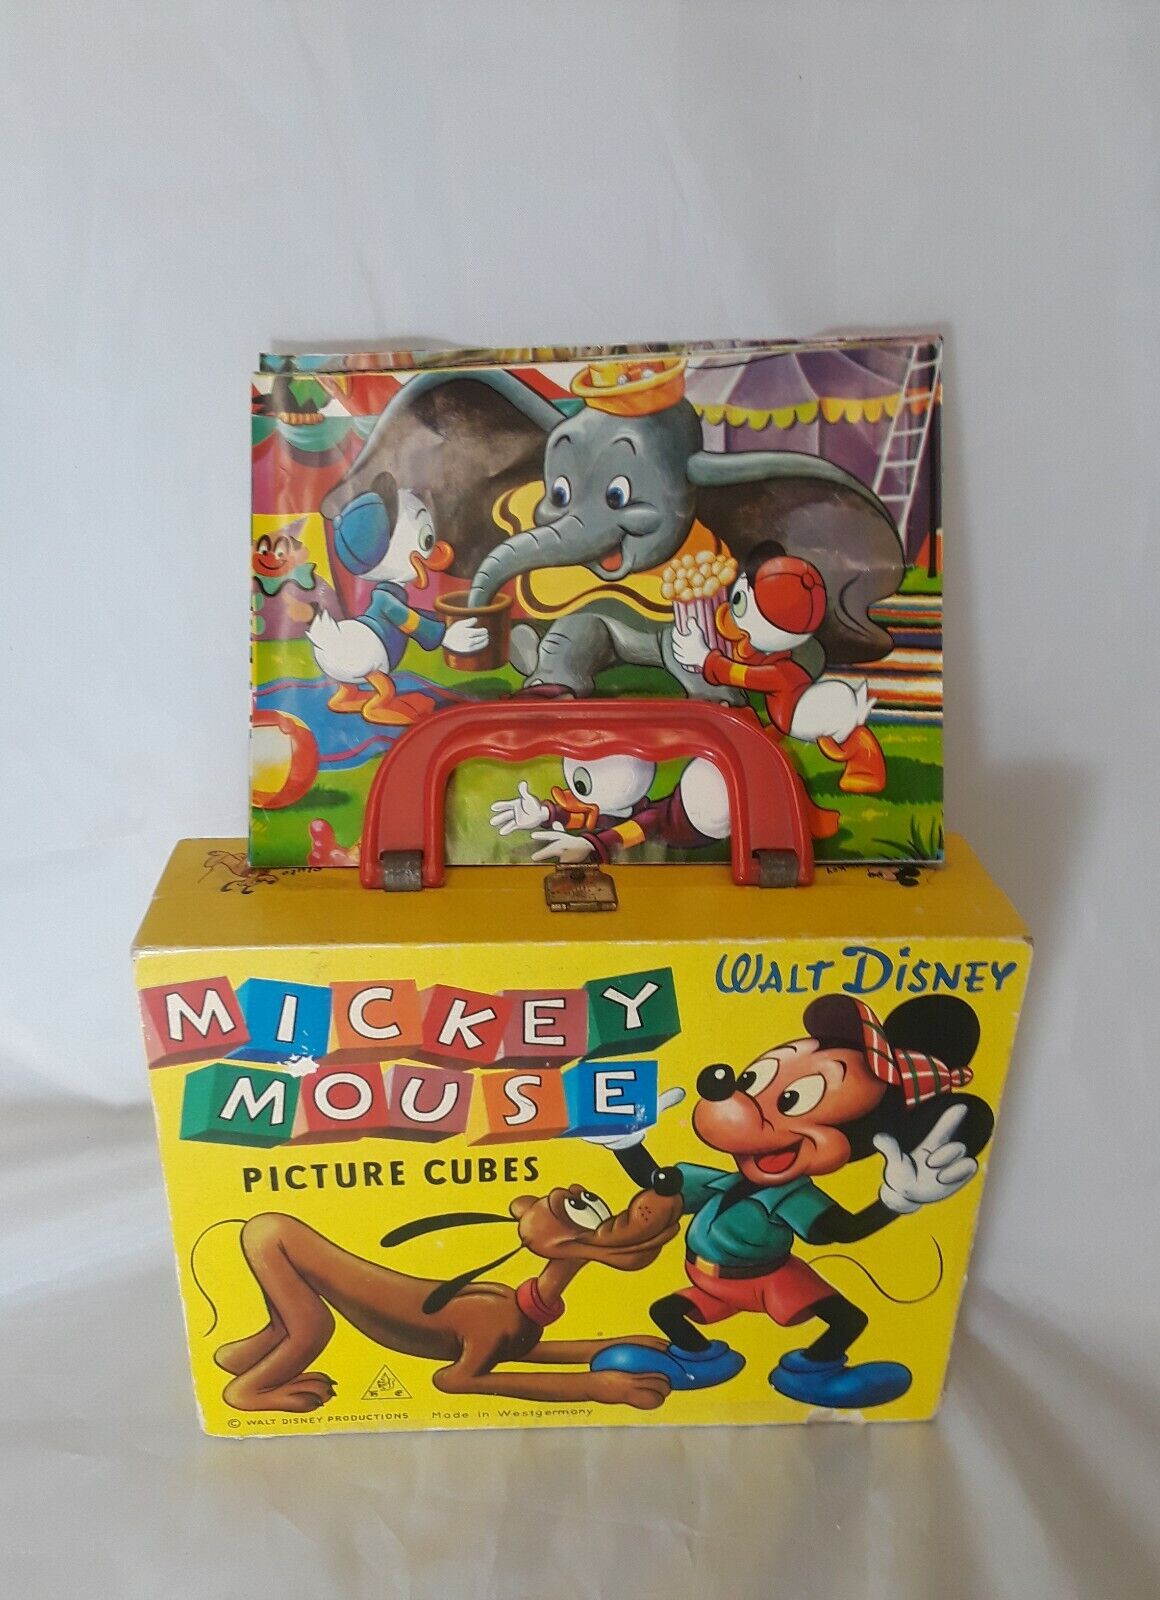 Vintage Walt Disney Picture Cubes Made in West Germany  1950's 